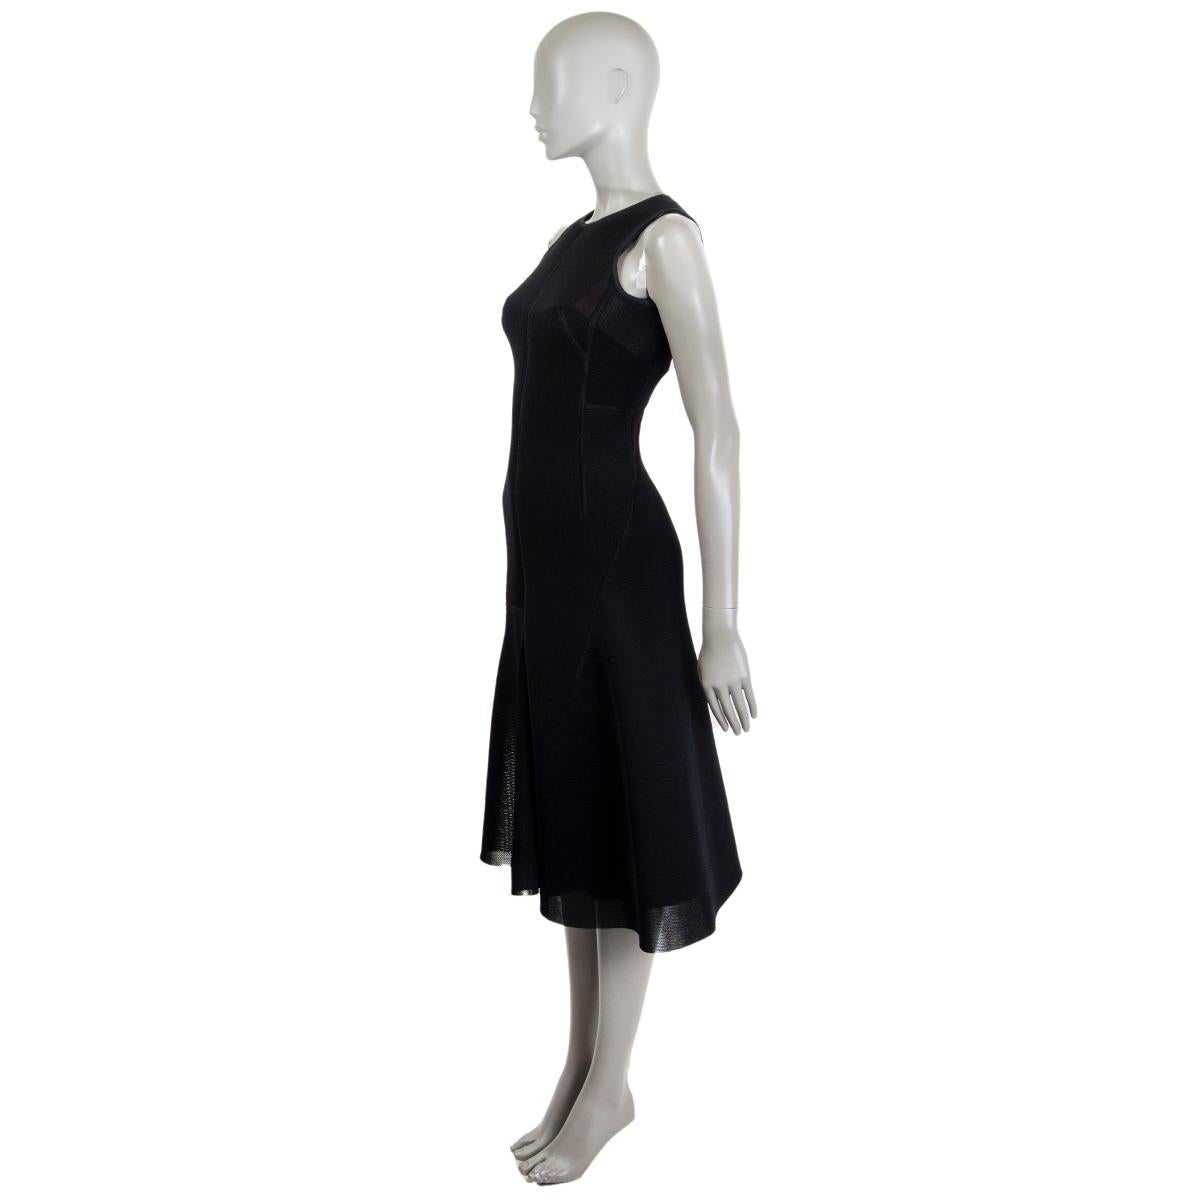 100% authentic Akris sleeveless flared bottom midi dress in black nylon (100%) with a round neck. Closes on the back with a concealed zipper. Dress is sheer. Comes with a slip in a black nylon blend (assumed as tag is missing). Has been worn and is